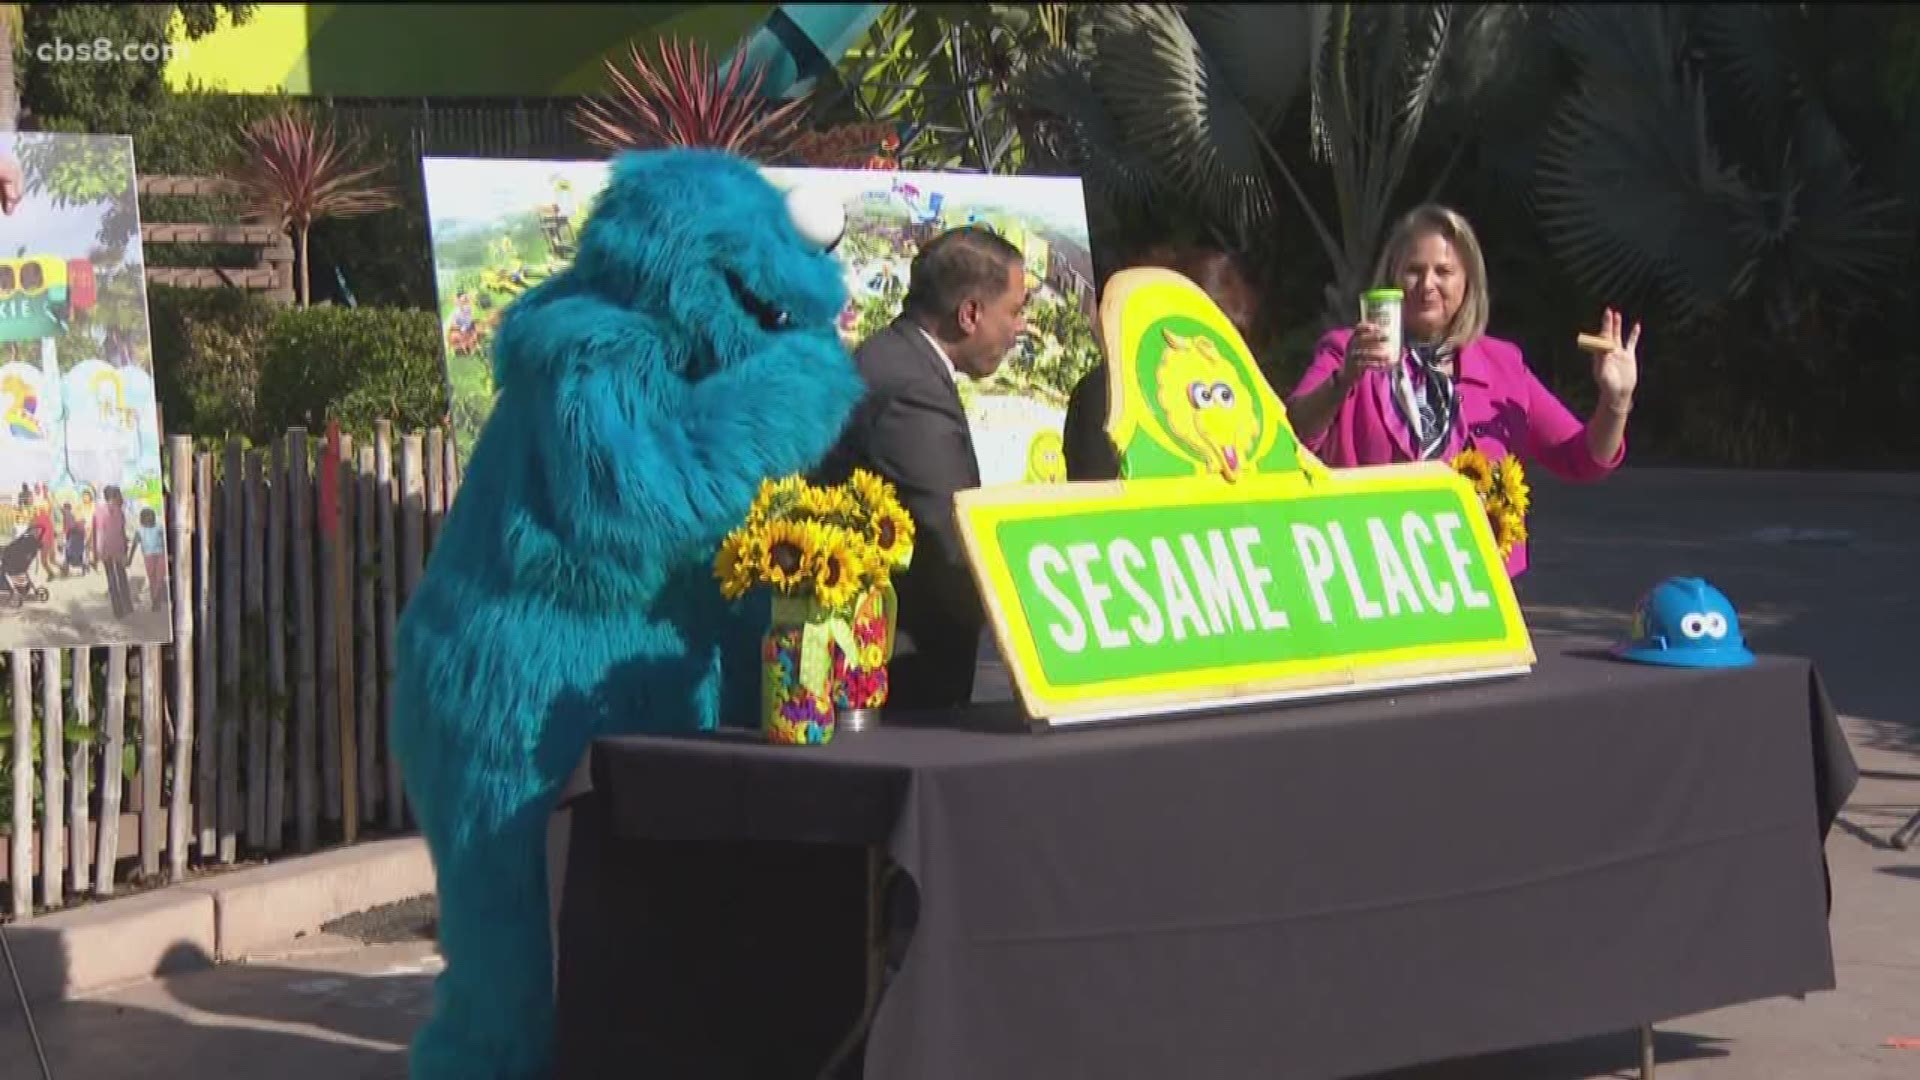 "Sesame Street"-themed park, is the first such theme park on the west coast and only the second in the country.